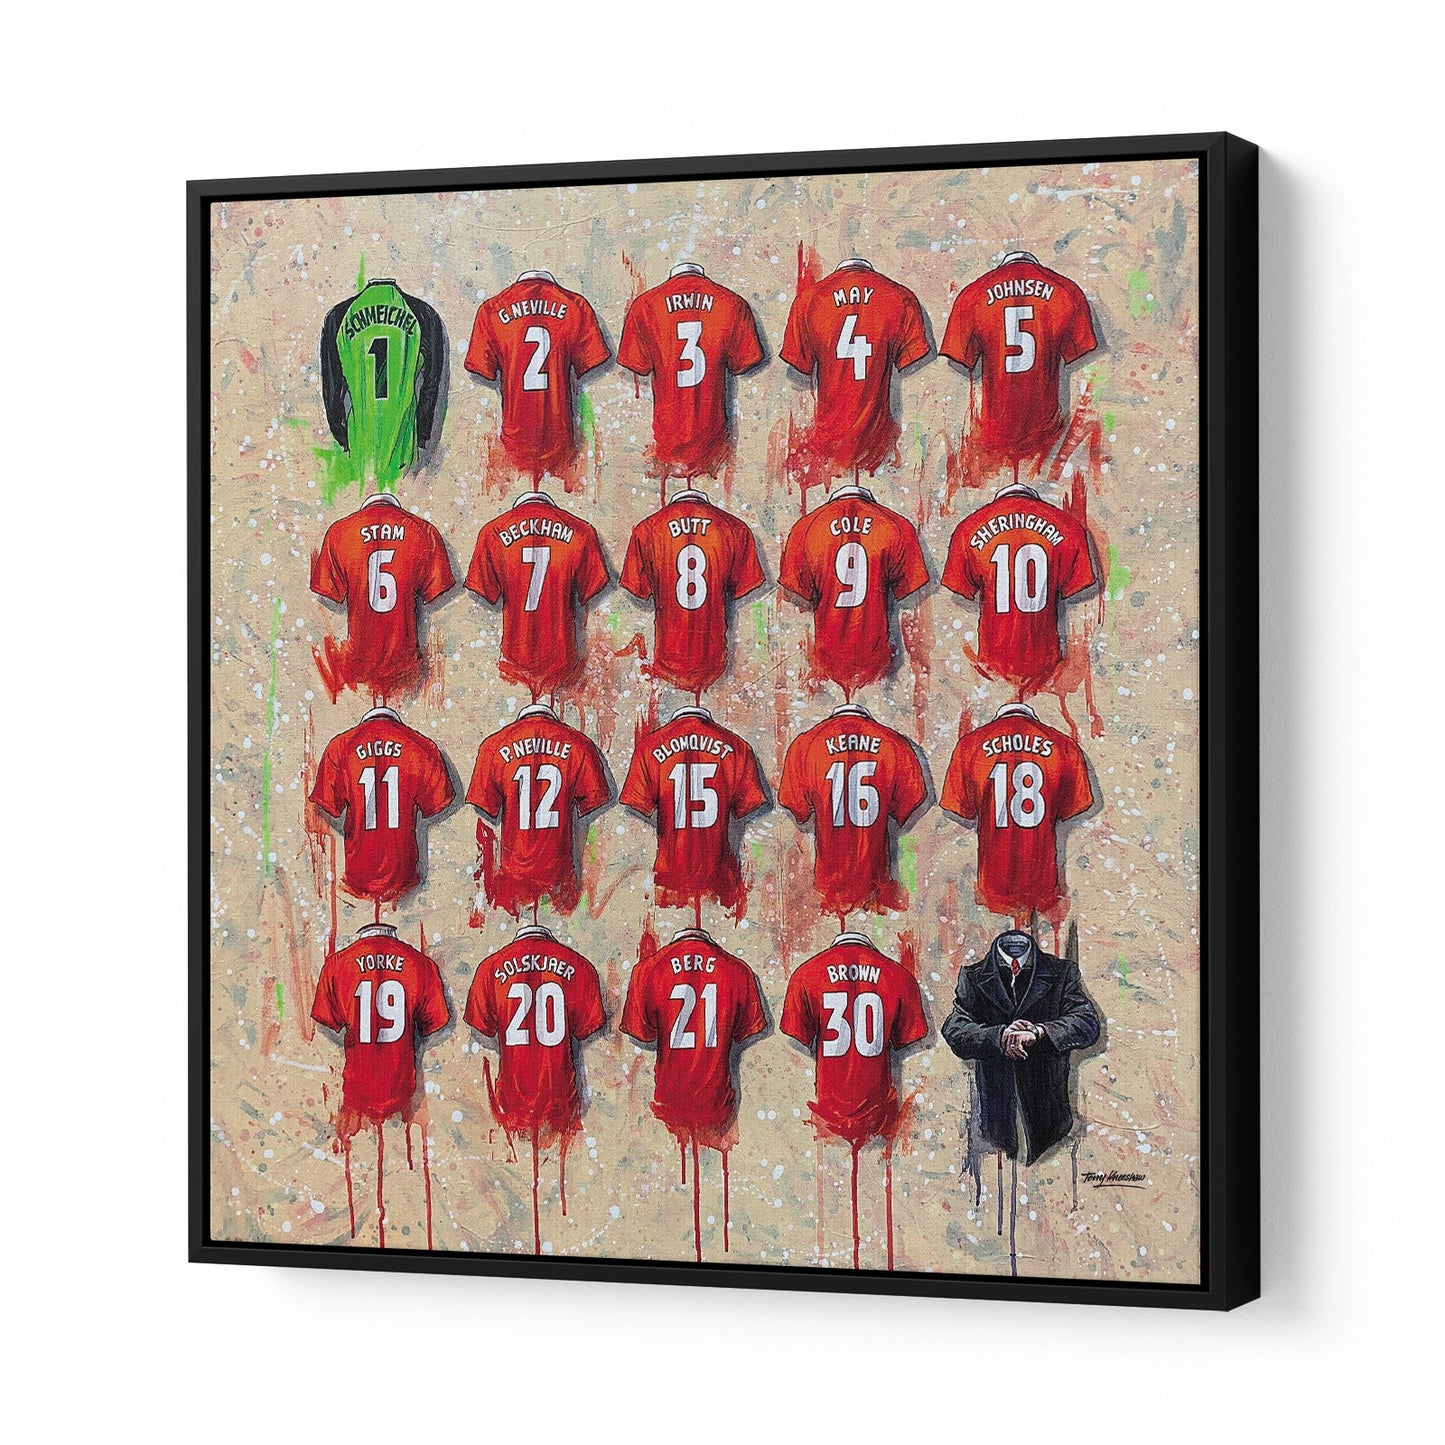 These Man United Treble Winners canvases from Terry Kneeshaw are perfect for fans of the historic 1999 team. The canvases are available in various sizes (20x20, 30x30 or 40x40) and framed or unframed in a black floating frame. The artwork features stunning images of the team and its players, commemorating the historic achievement of winning the Premier League, FA Cup, and UEFA Champions League in the same season. Display your love for the Red Devils with these high-quality canvases.